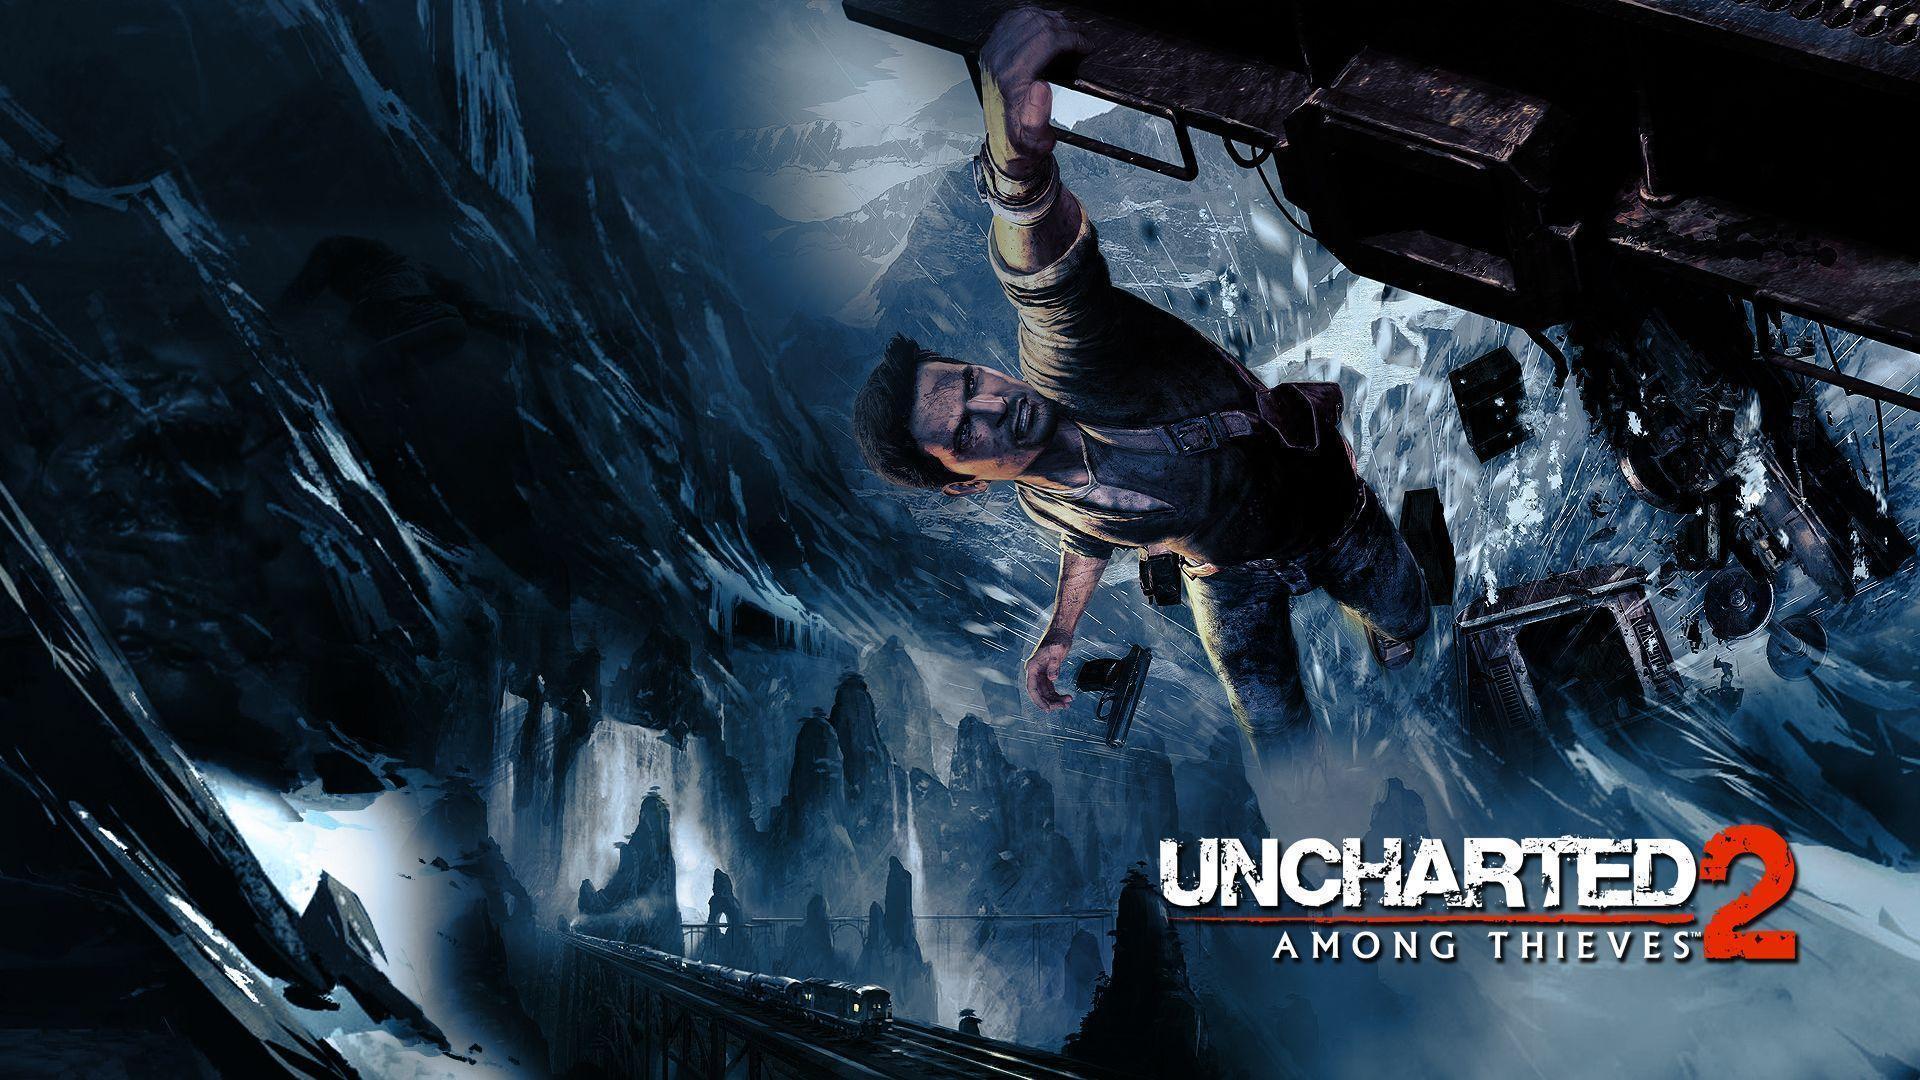 Uncharted Wallpaper High Quality